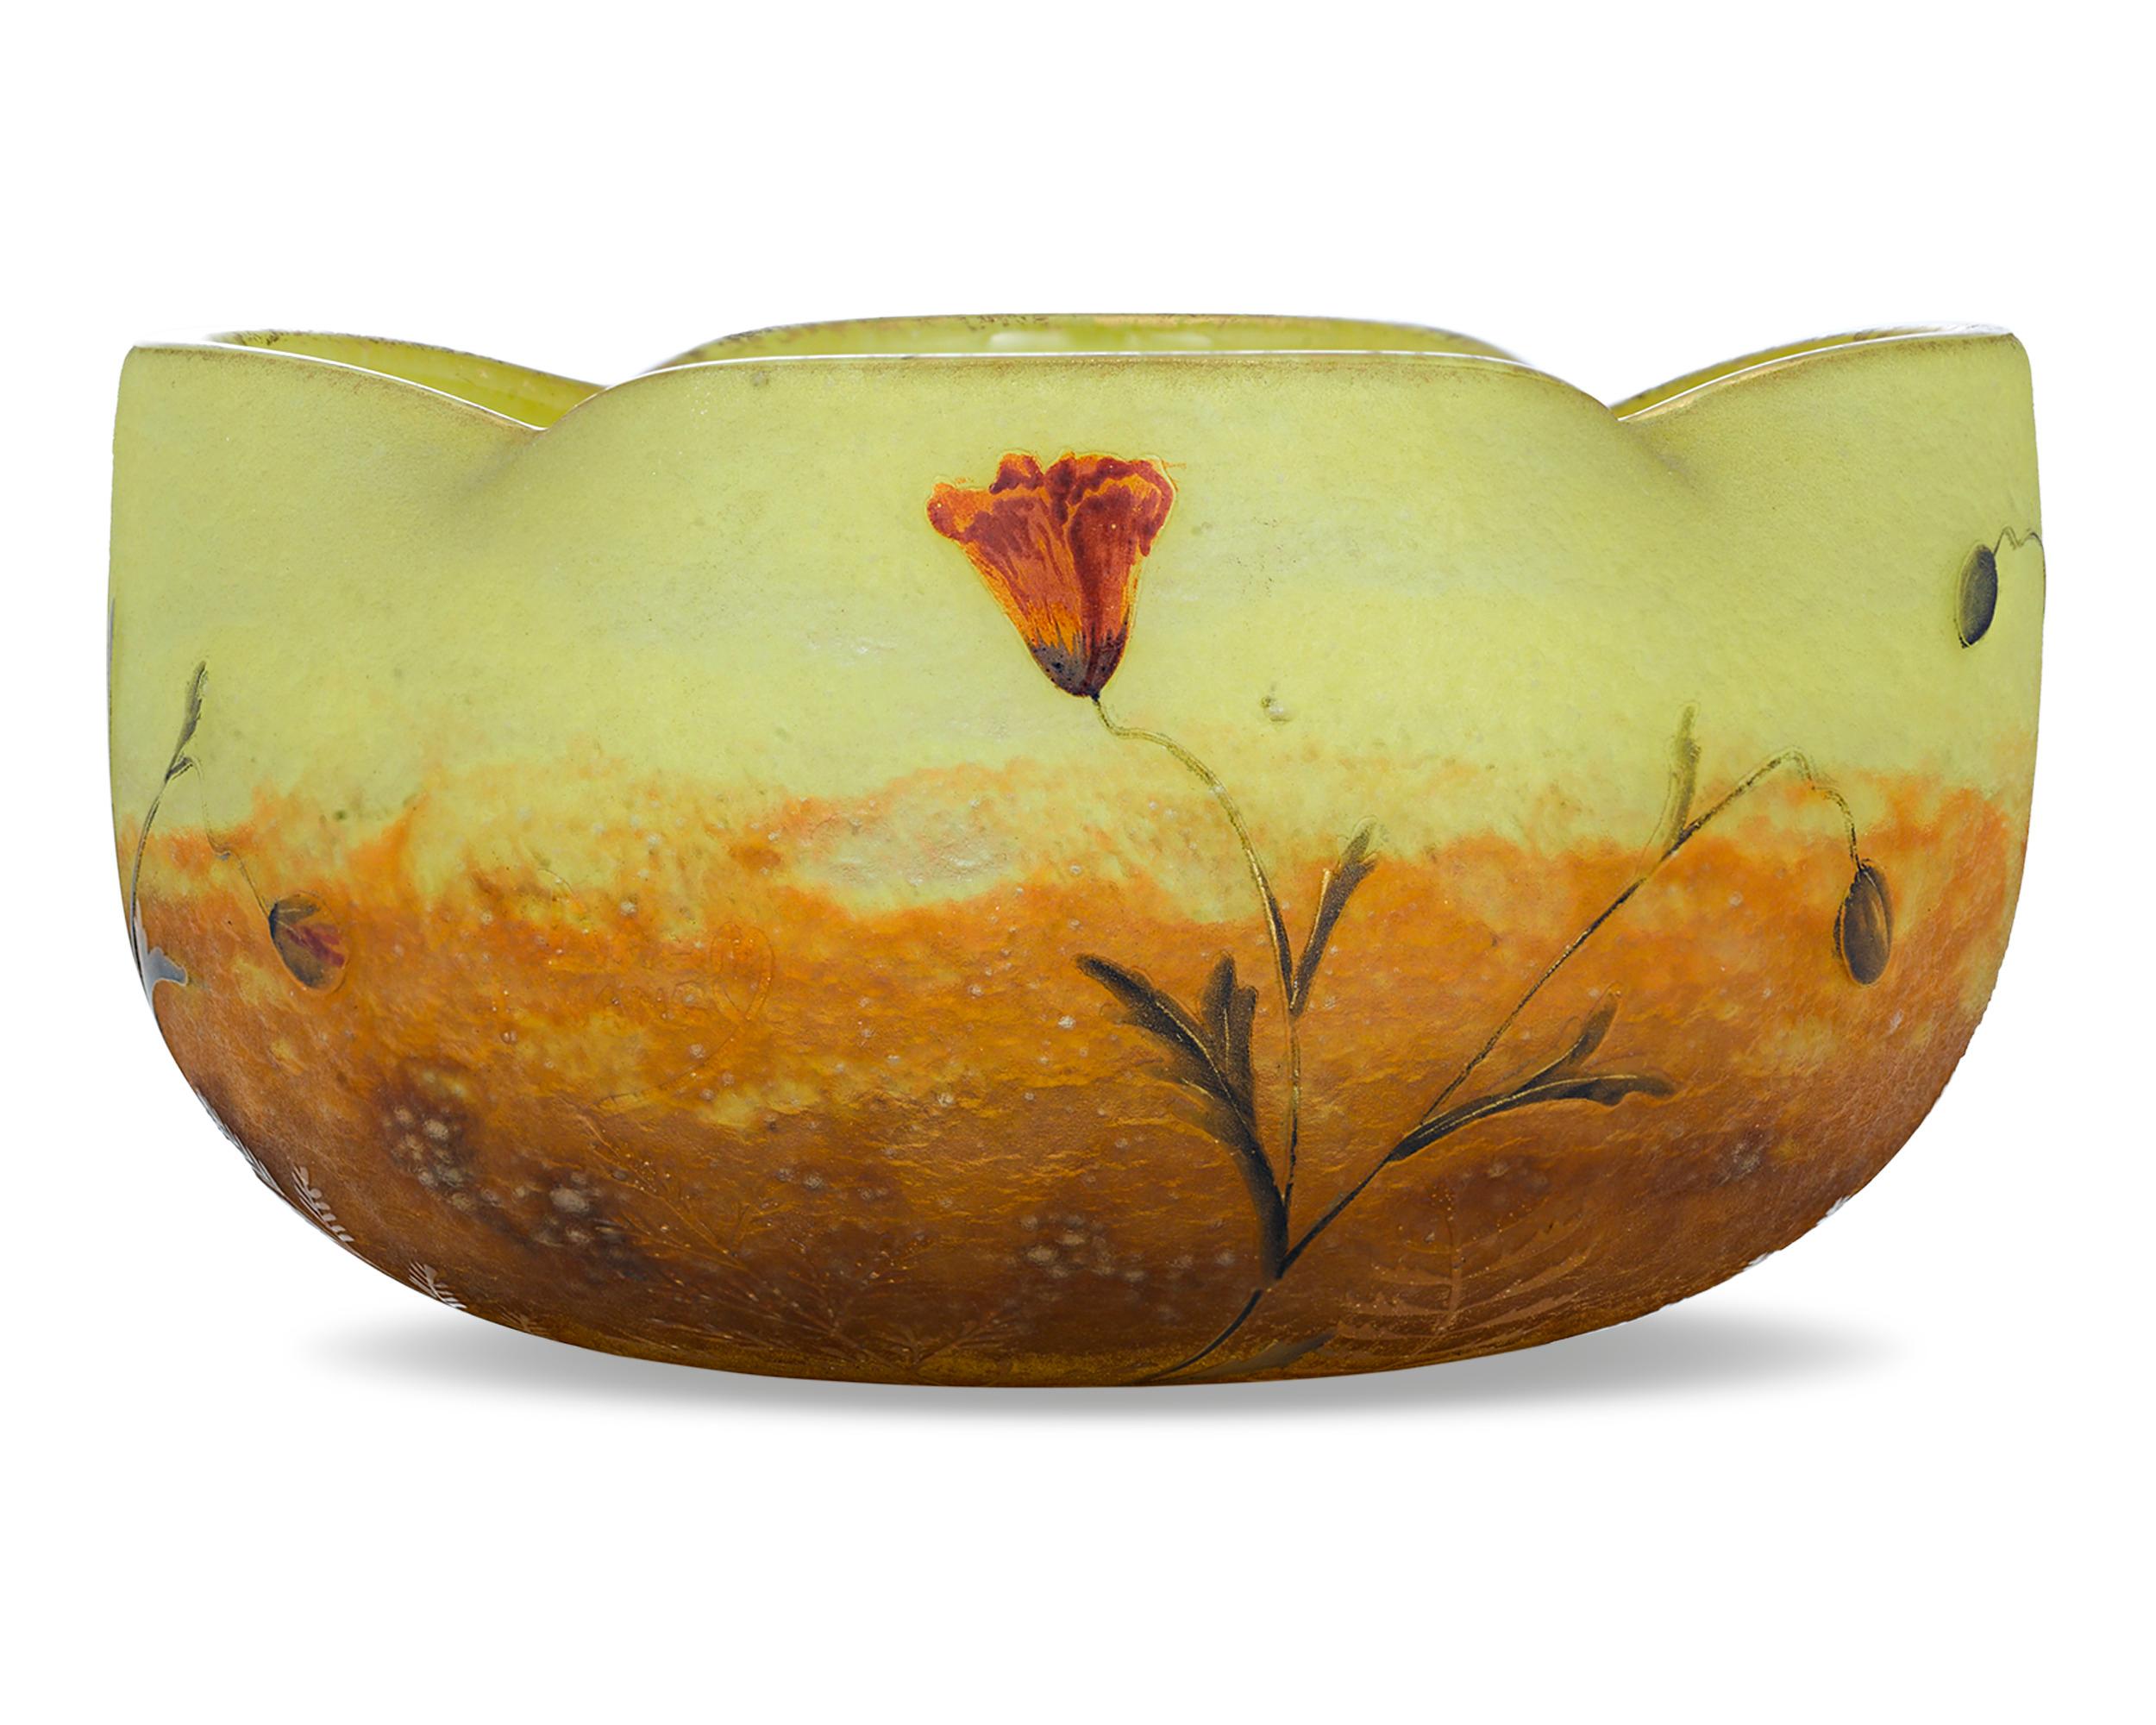 Wildflowers are in bloom on this rare cameo art glass bowl by the renowned French glassmaking firm of Daum, Nancy. The graceful vessel features a wavy-edged rim and delicate, wistful flowers residing upon a sunset background of yellow and orange.